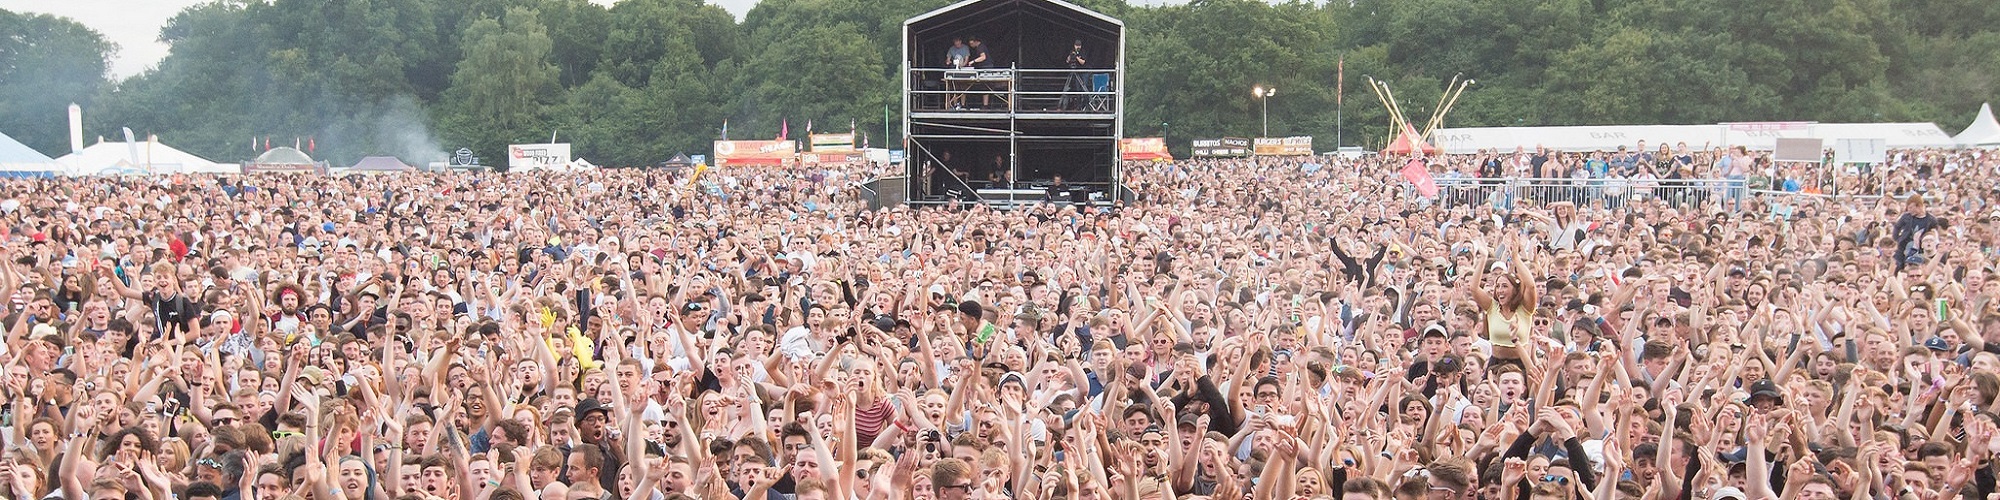 A picture of the crowd from the main stage